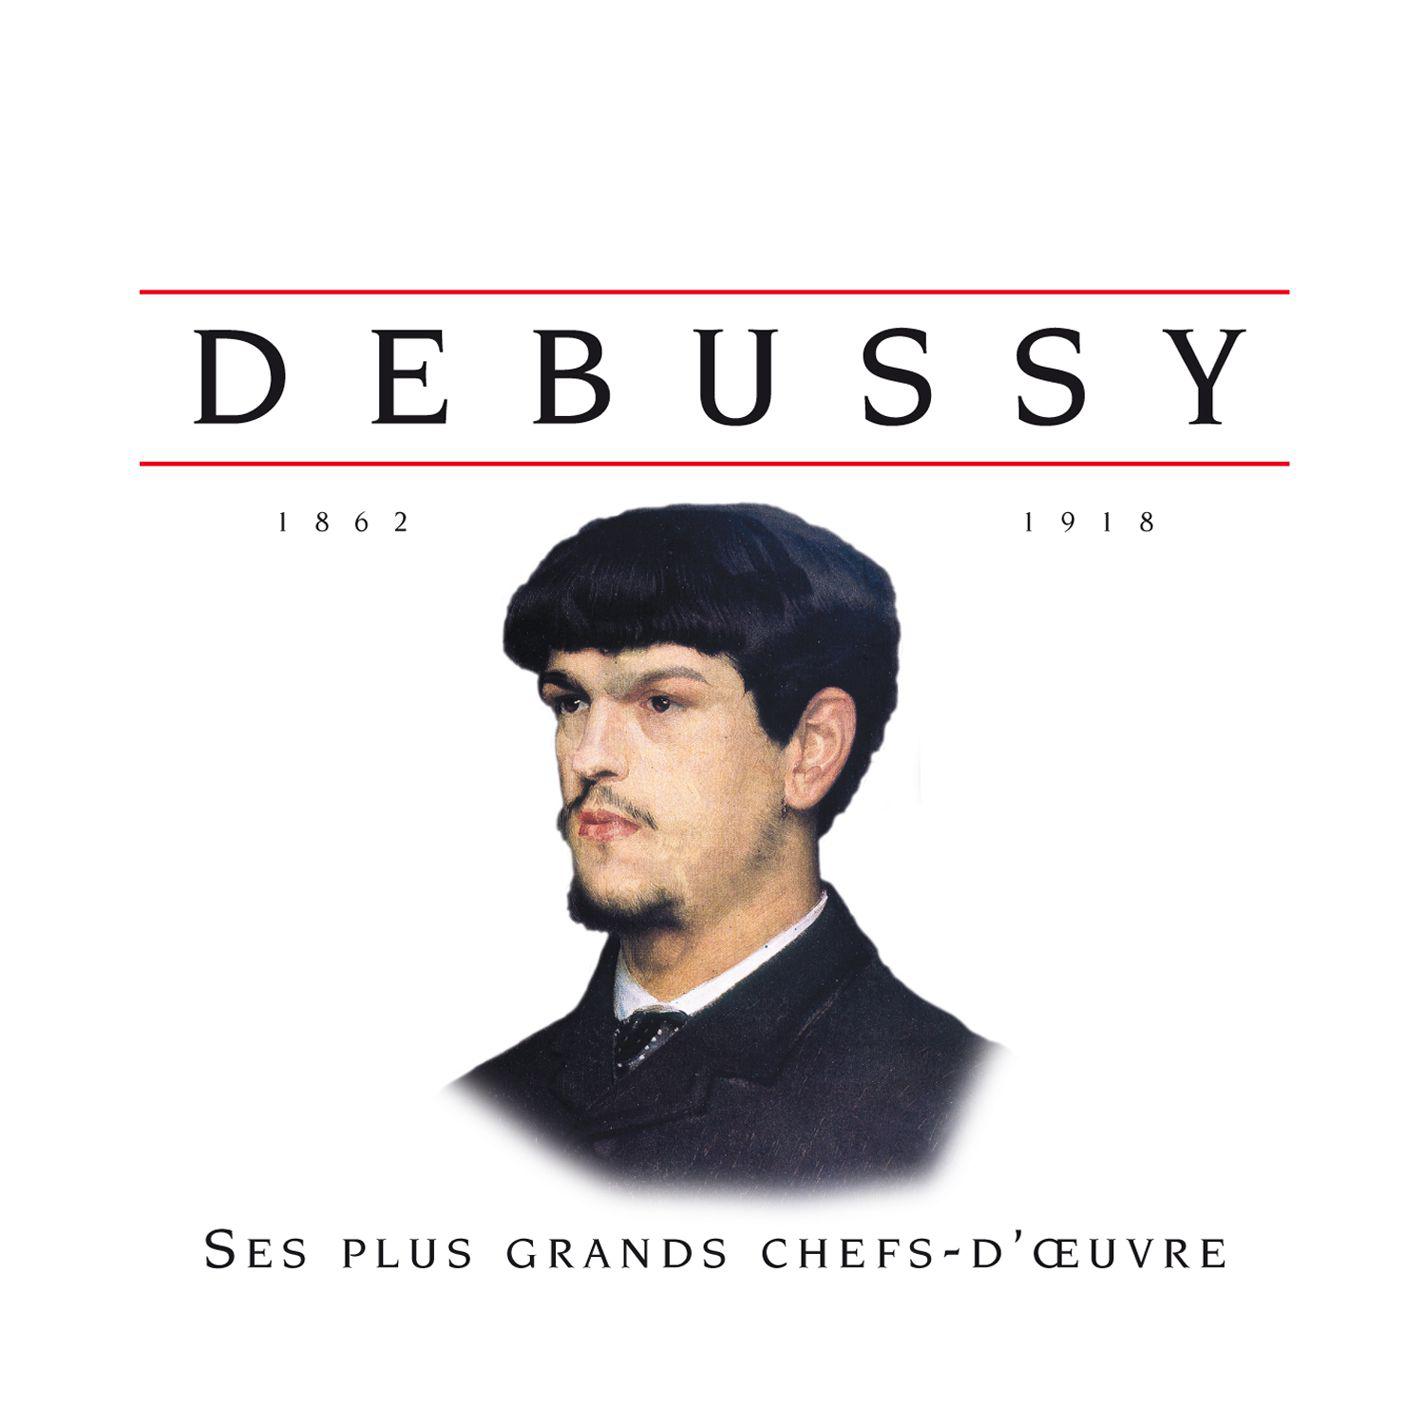 Debussy Ses plus grands chefs-d'oeuvre